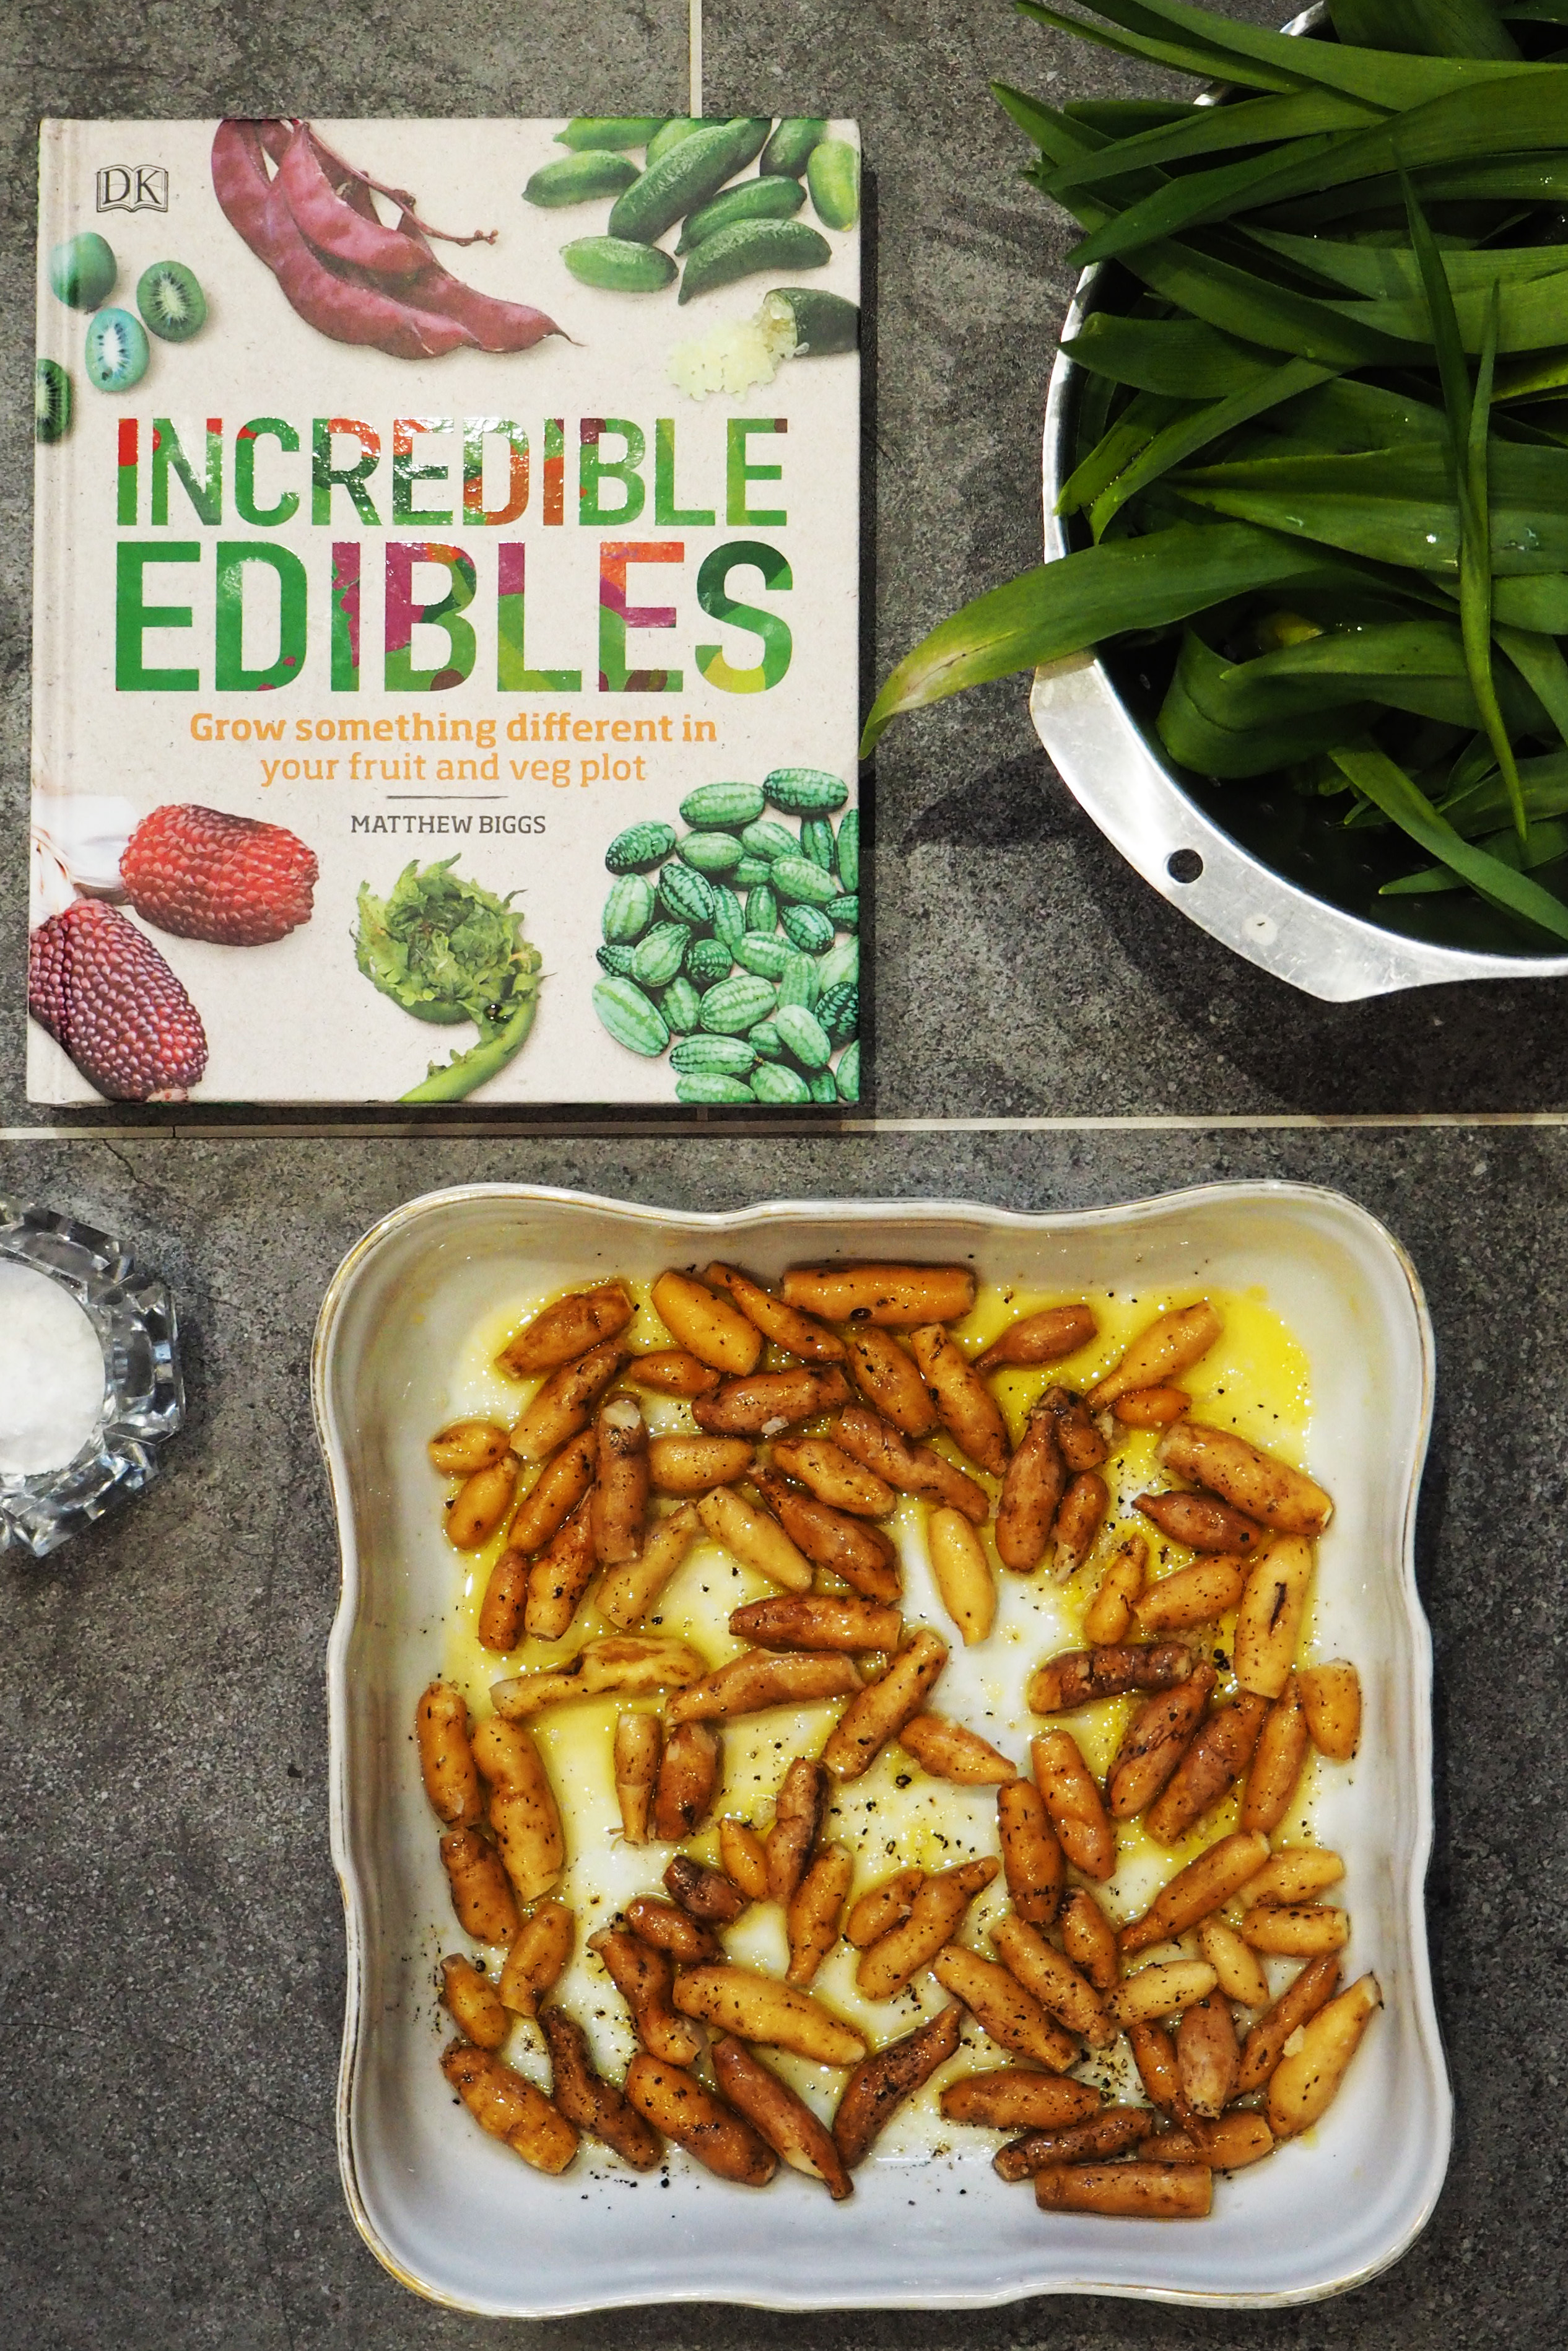 Edible daylilies and more exciting plants you can eat from Incredible Edibles by Matthew Biggs